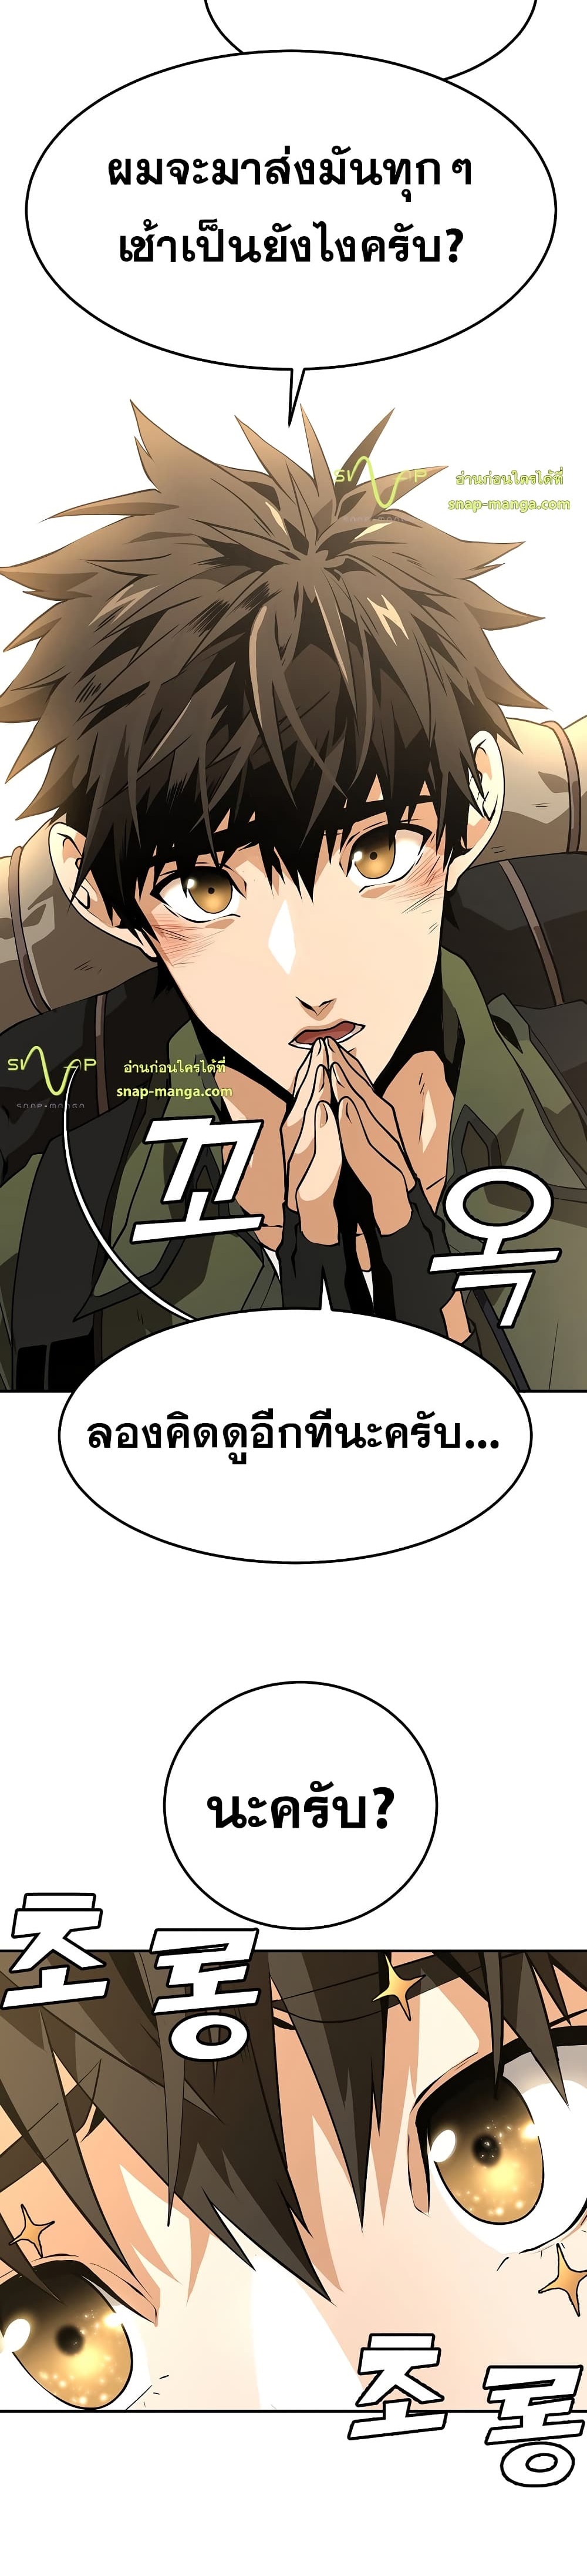 Messiah: End of the Gods ตอนที่ 1